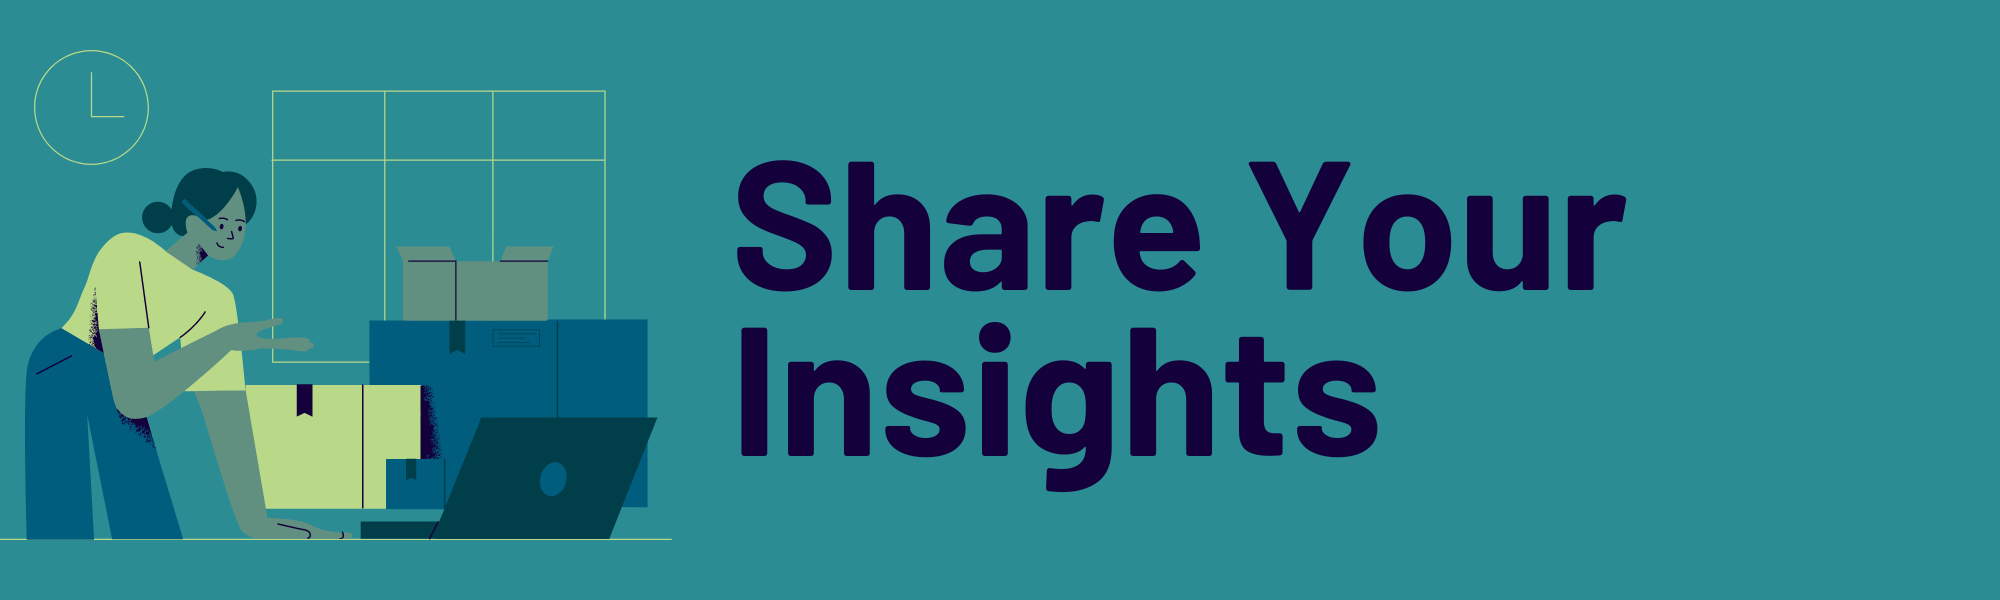 MFP Share Your Insights Button